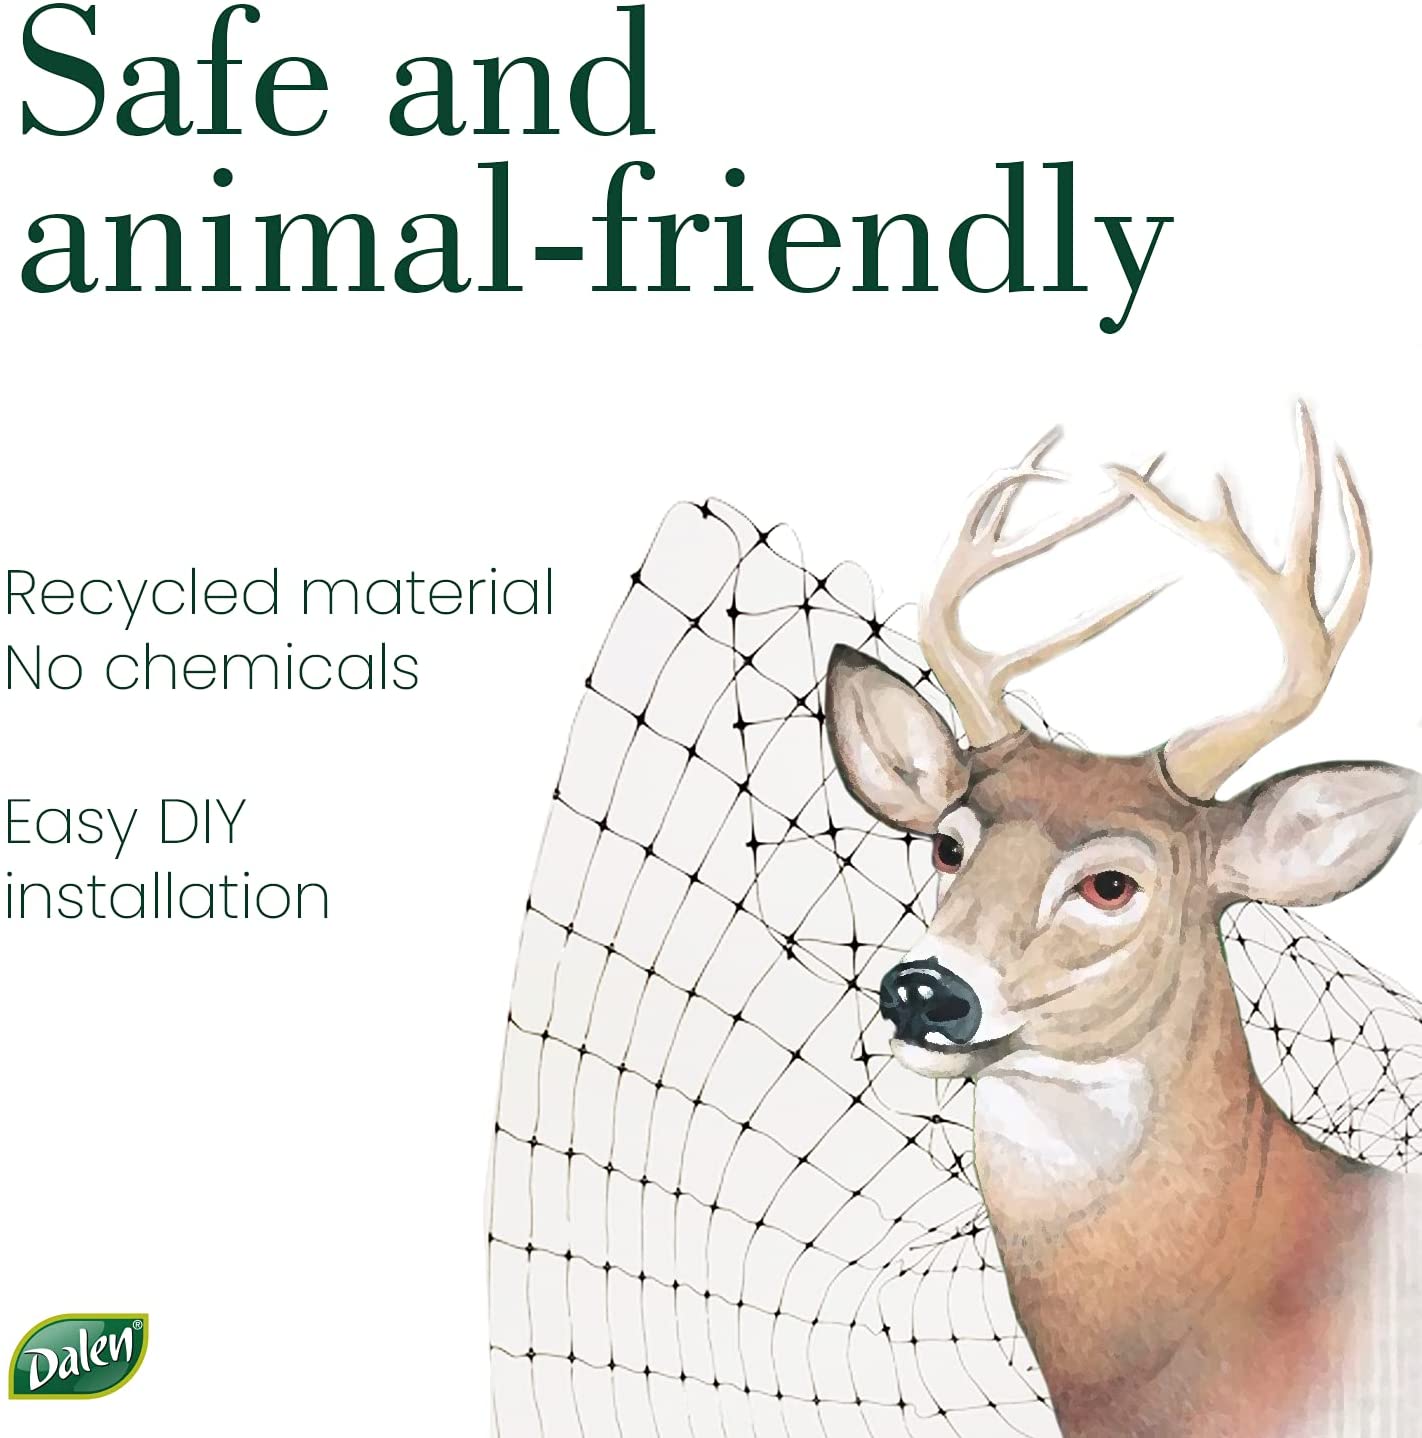 5. DALEN DEER Protective Netting for Gardens and Landscapes